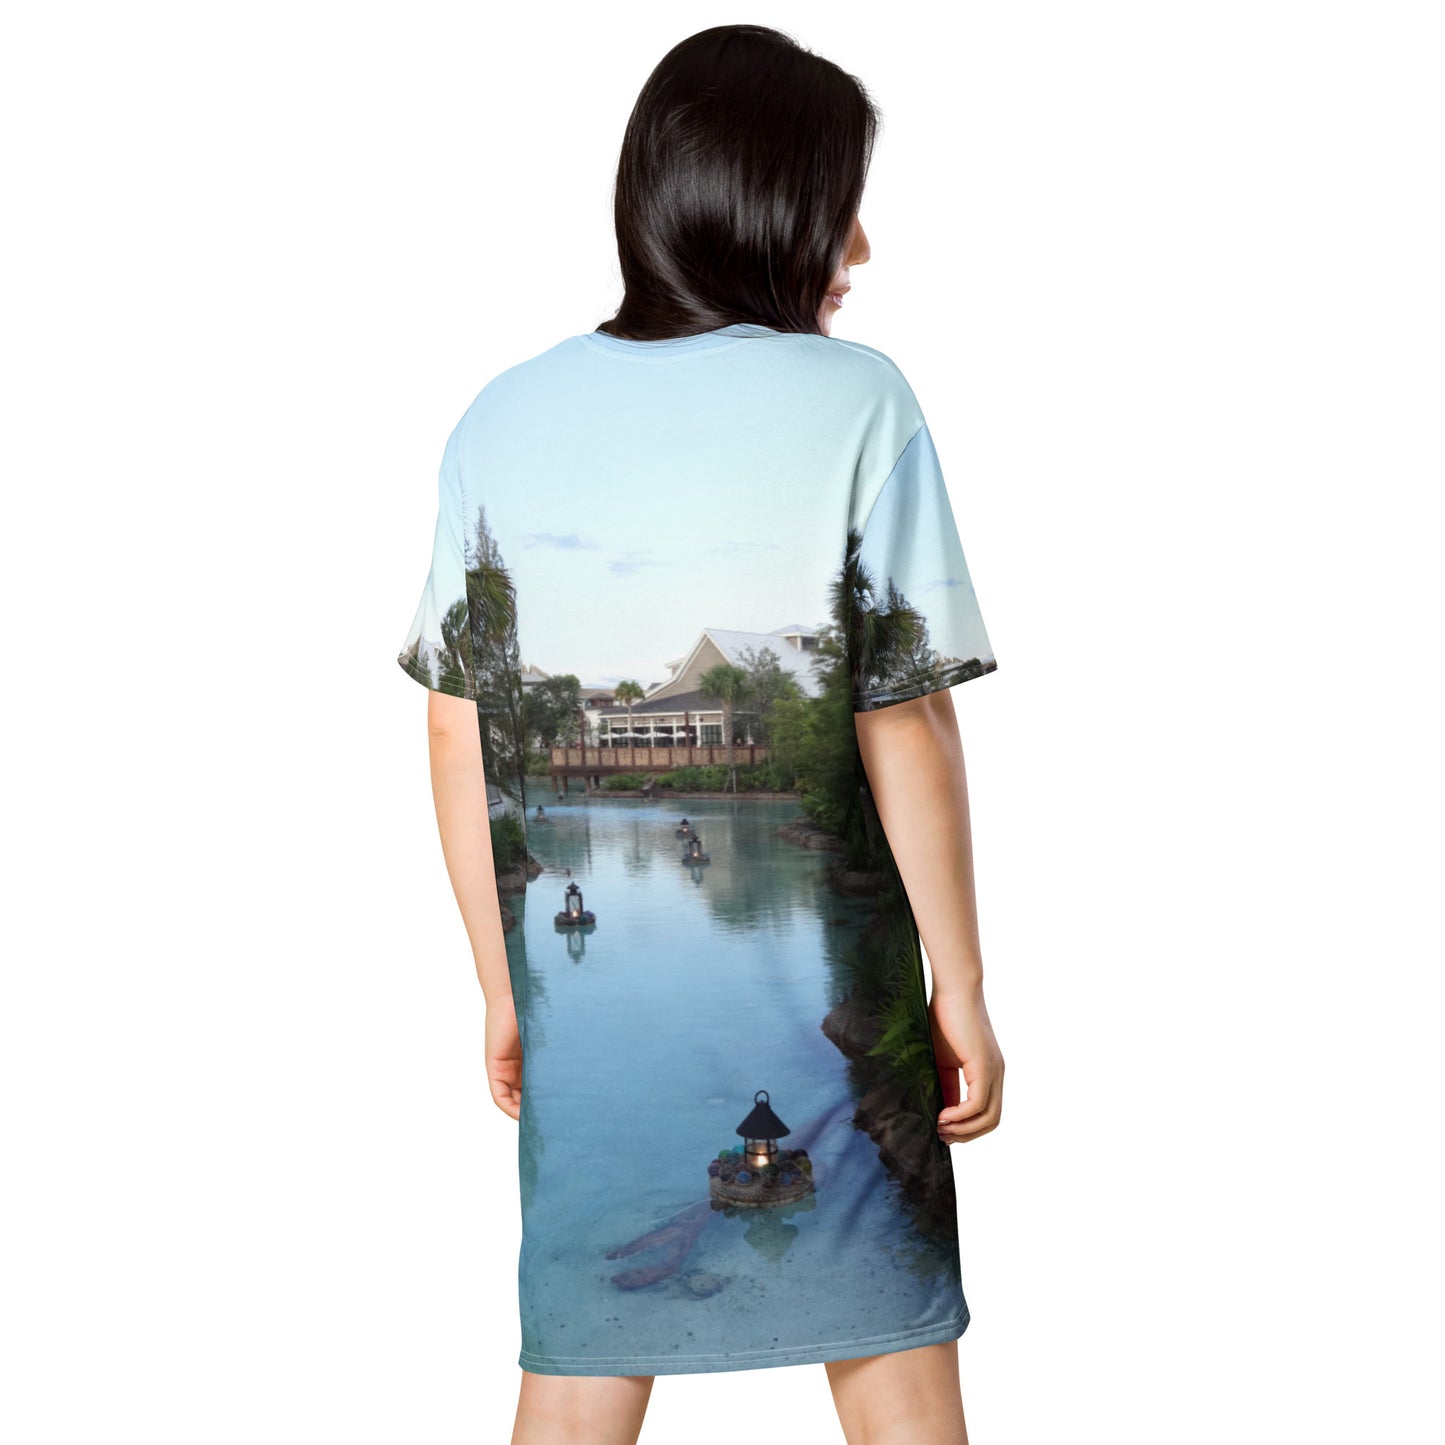 Pictured is a women wearing an all over print tshirt dress with a photograph of a little river flowing through a village - dress back